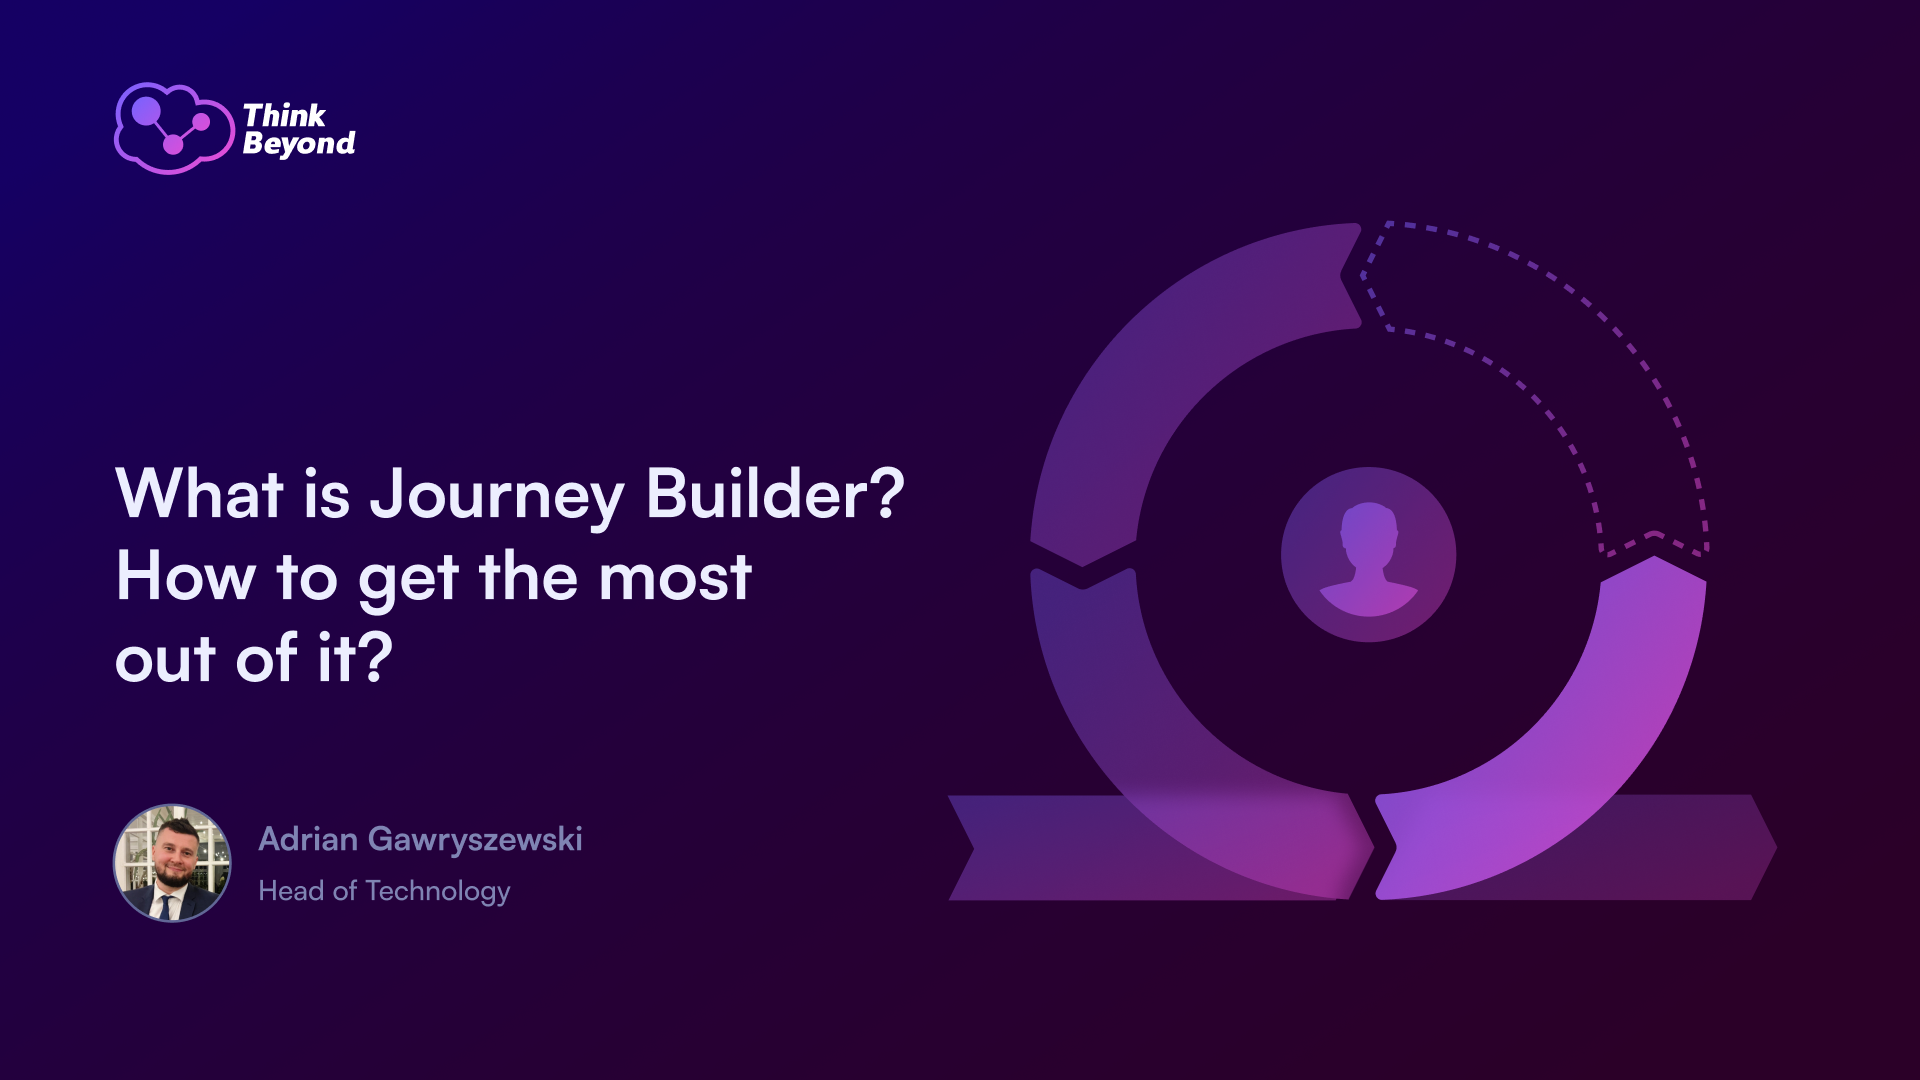 What is Journey Builder? How to get the most out of it?